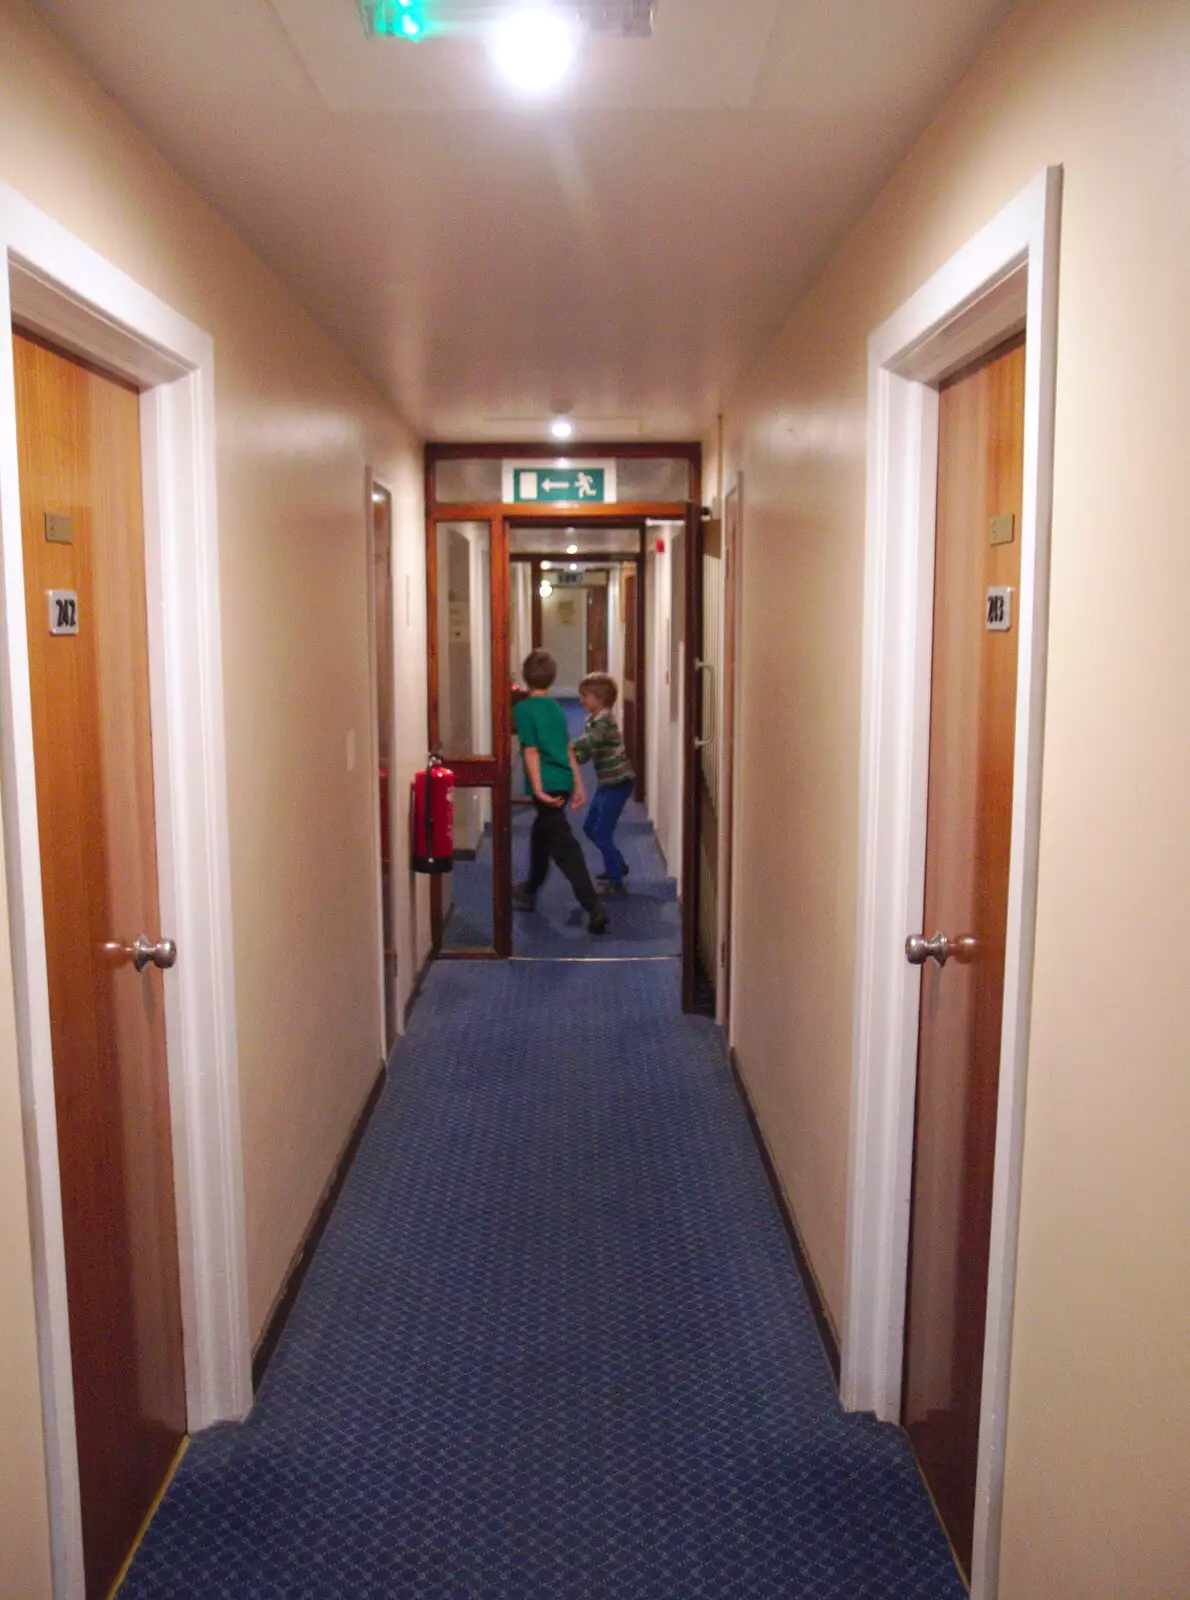 Back upstairs near the room, from The Summer Trip to Ireland, Monkstown, Co. Dublin, Ireland - 9th August 2019